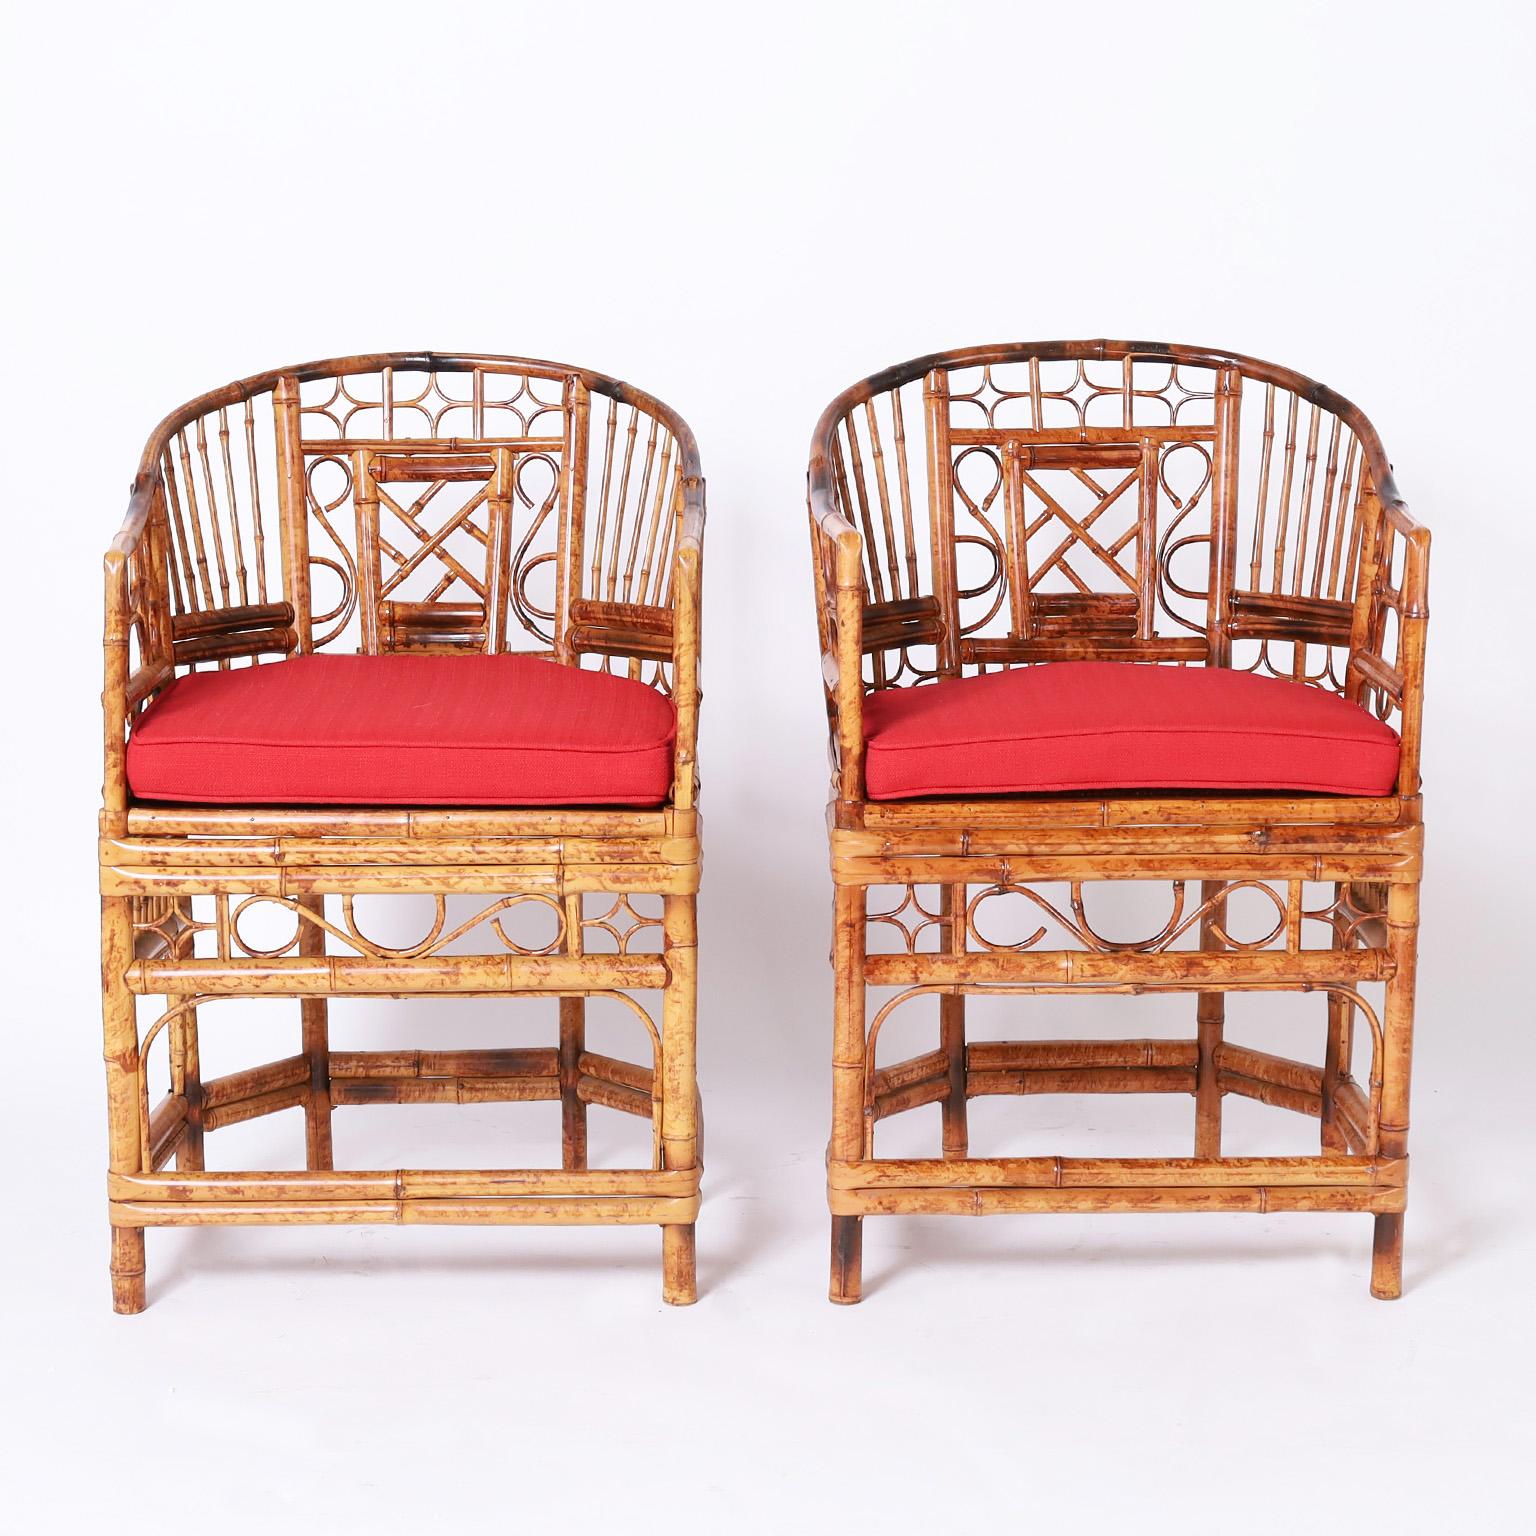 Mid-century pair of the iconic Brighton Pavilion chairs crafted in bamboo and rattan with caned seats in an Asian form with chippendale influences.